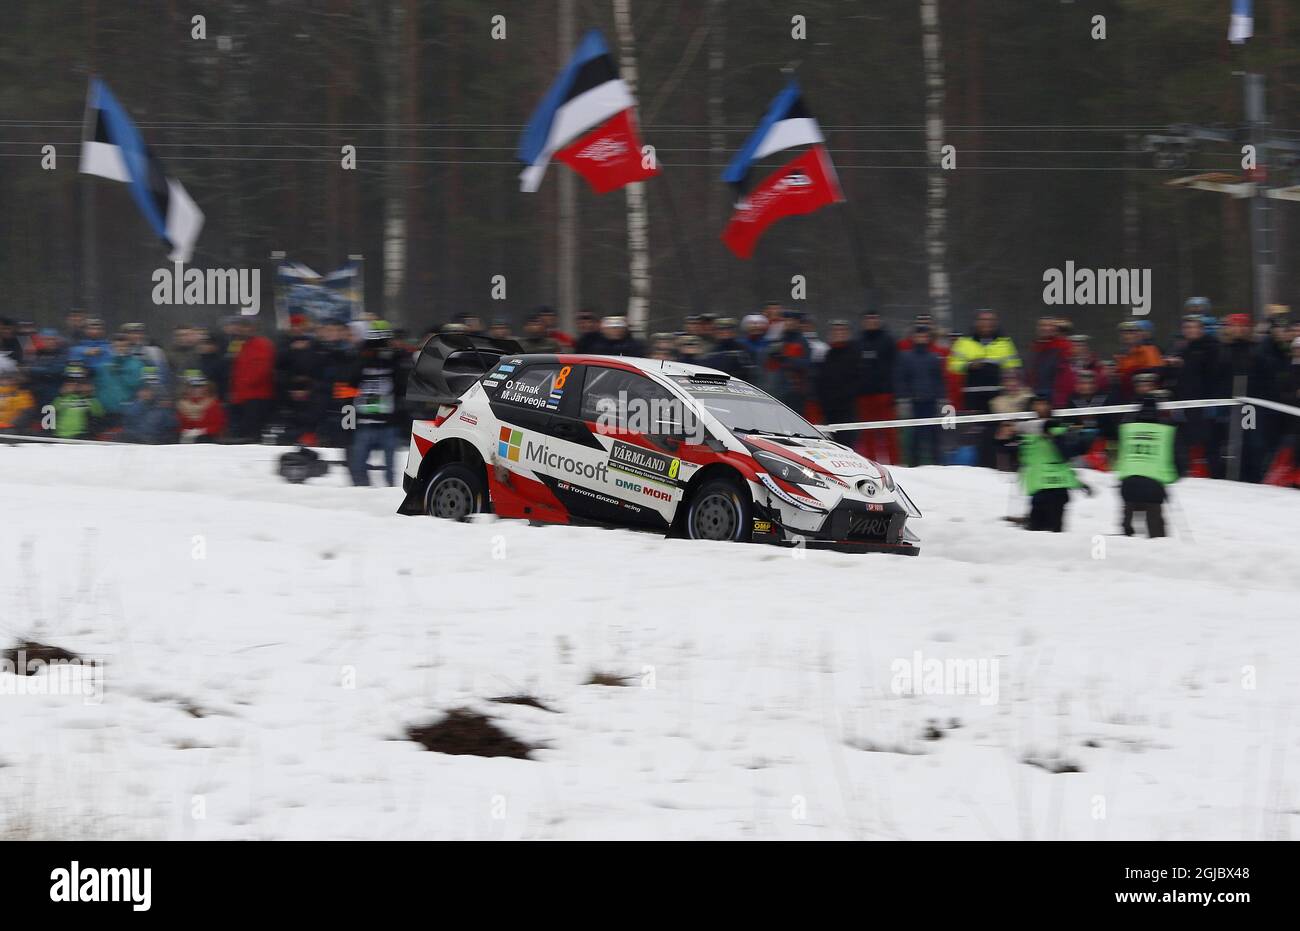 Ott Tanak EST/Martin Jarveoja EST, Toyota Yaris WRC at special stage 13 during day 3 of the second round of the FIA World Rally Championship, Rally Sweden 2019, in Sweden, 156 February 2019. Photo: Micke Fransson/TT kod 61460  Stock Photo